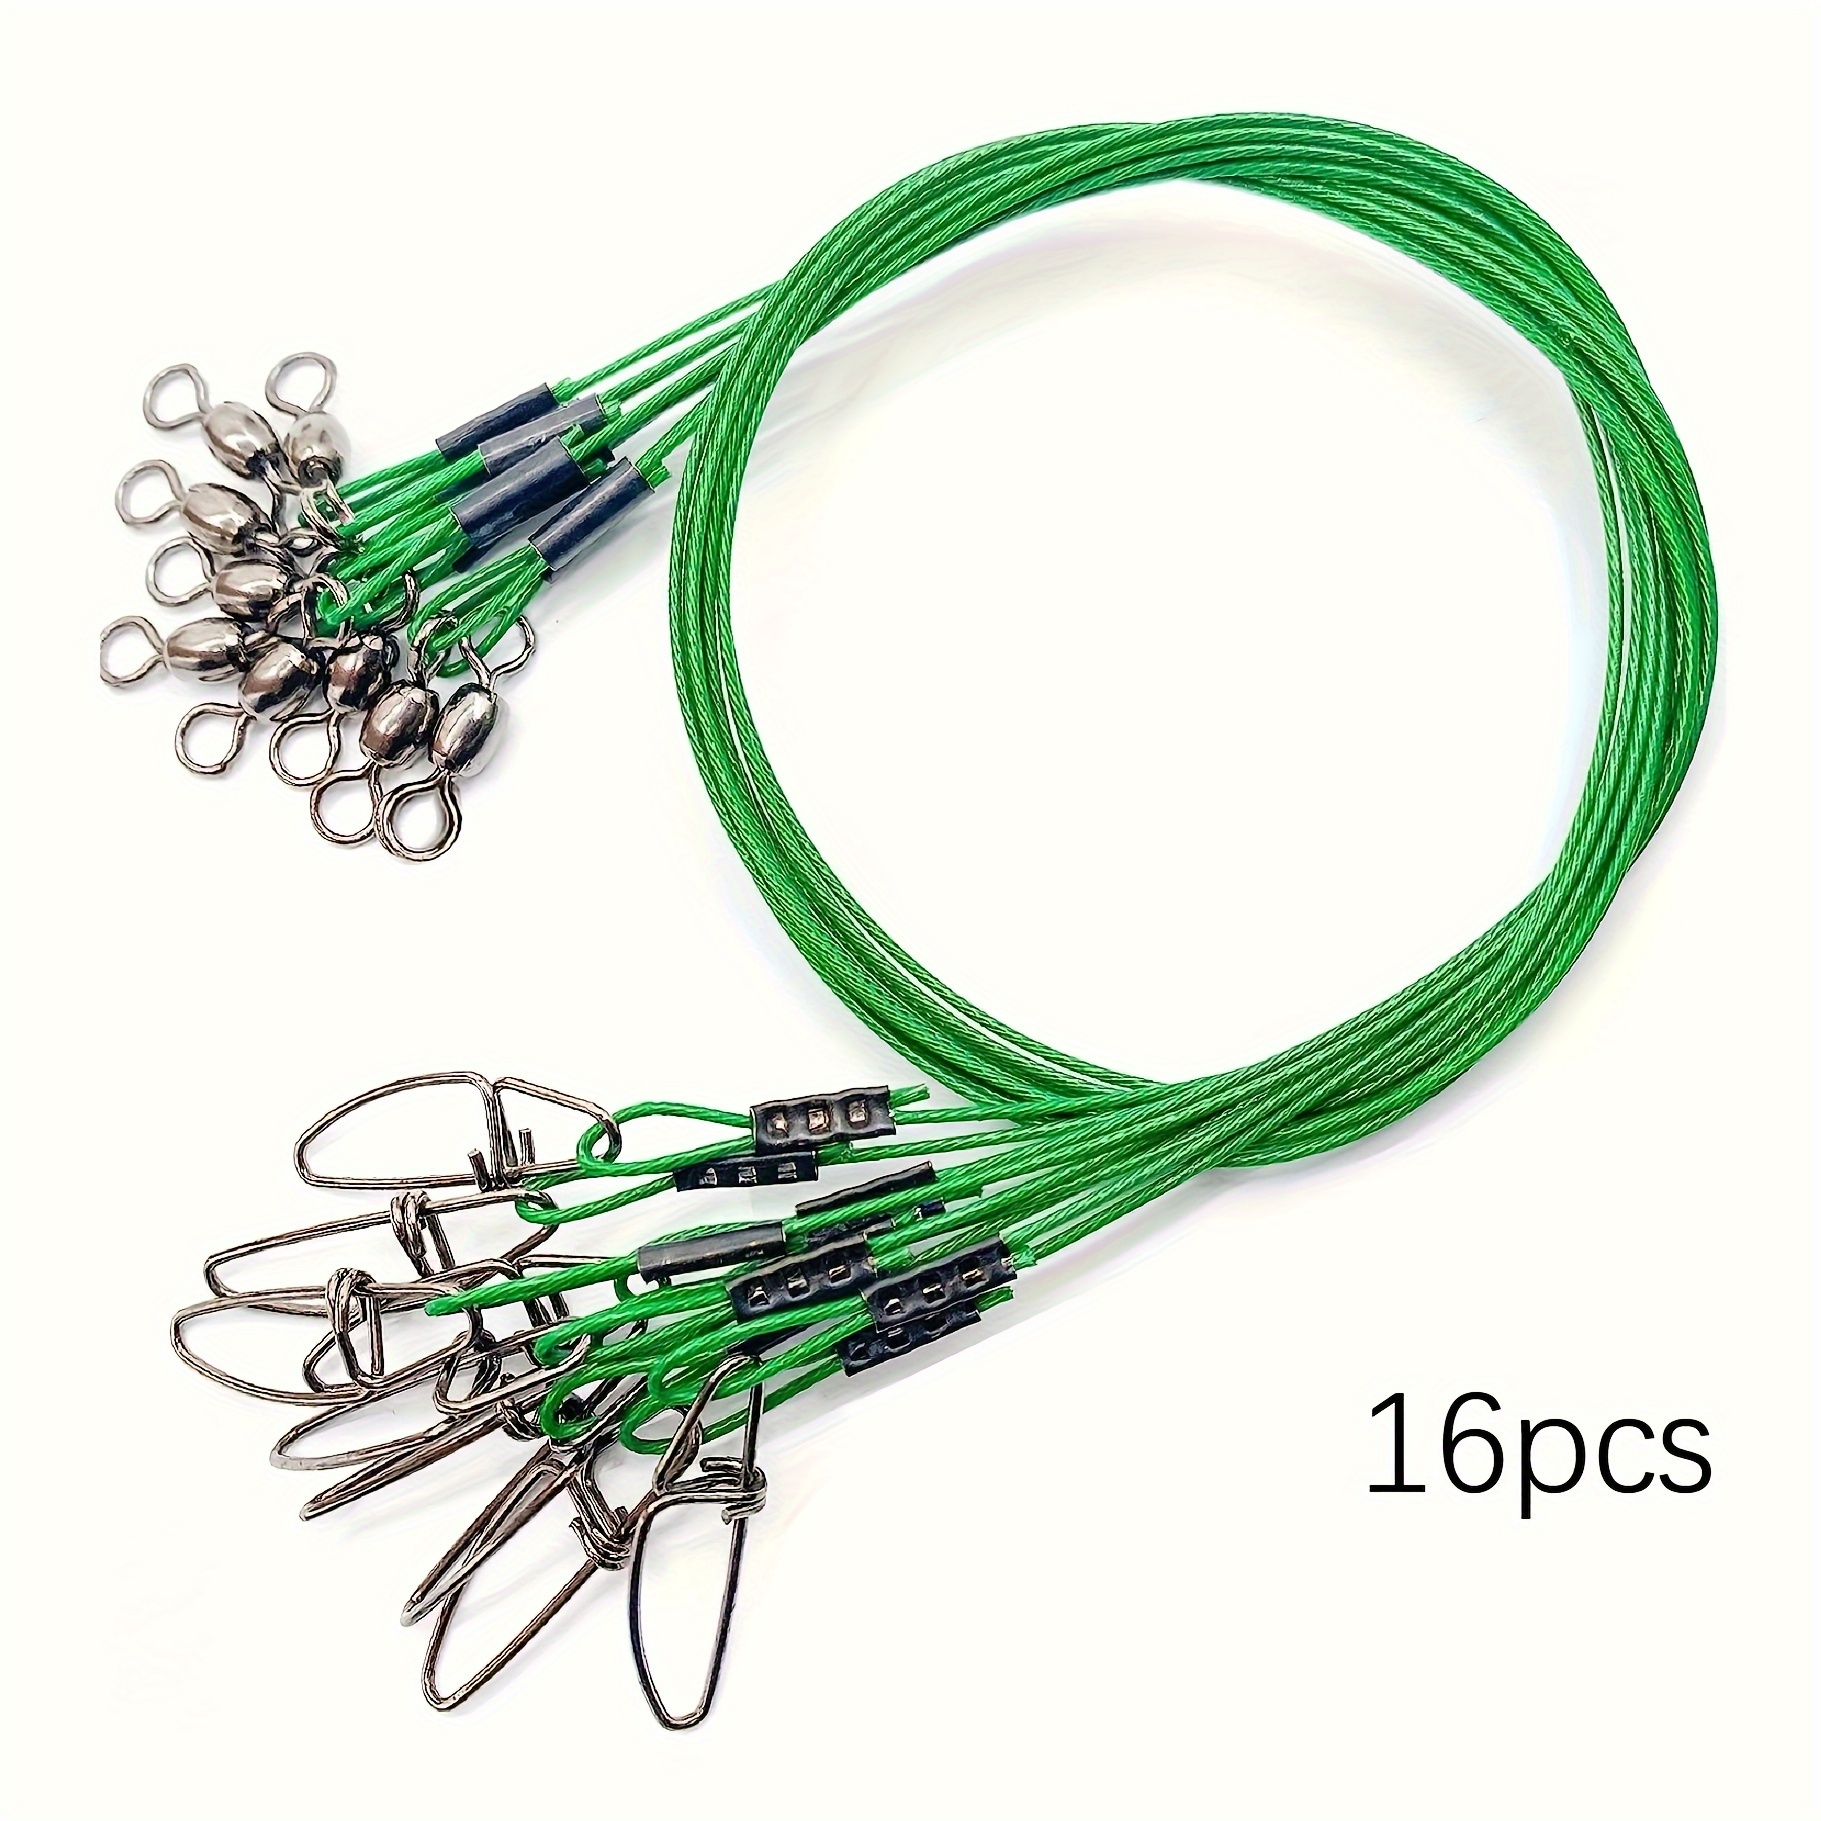 60pcs Fishing Wire Leaders Nylon-coated Fishing Line Wire Leaders